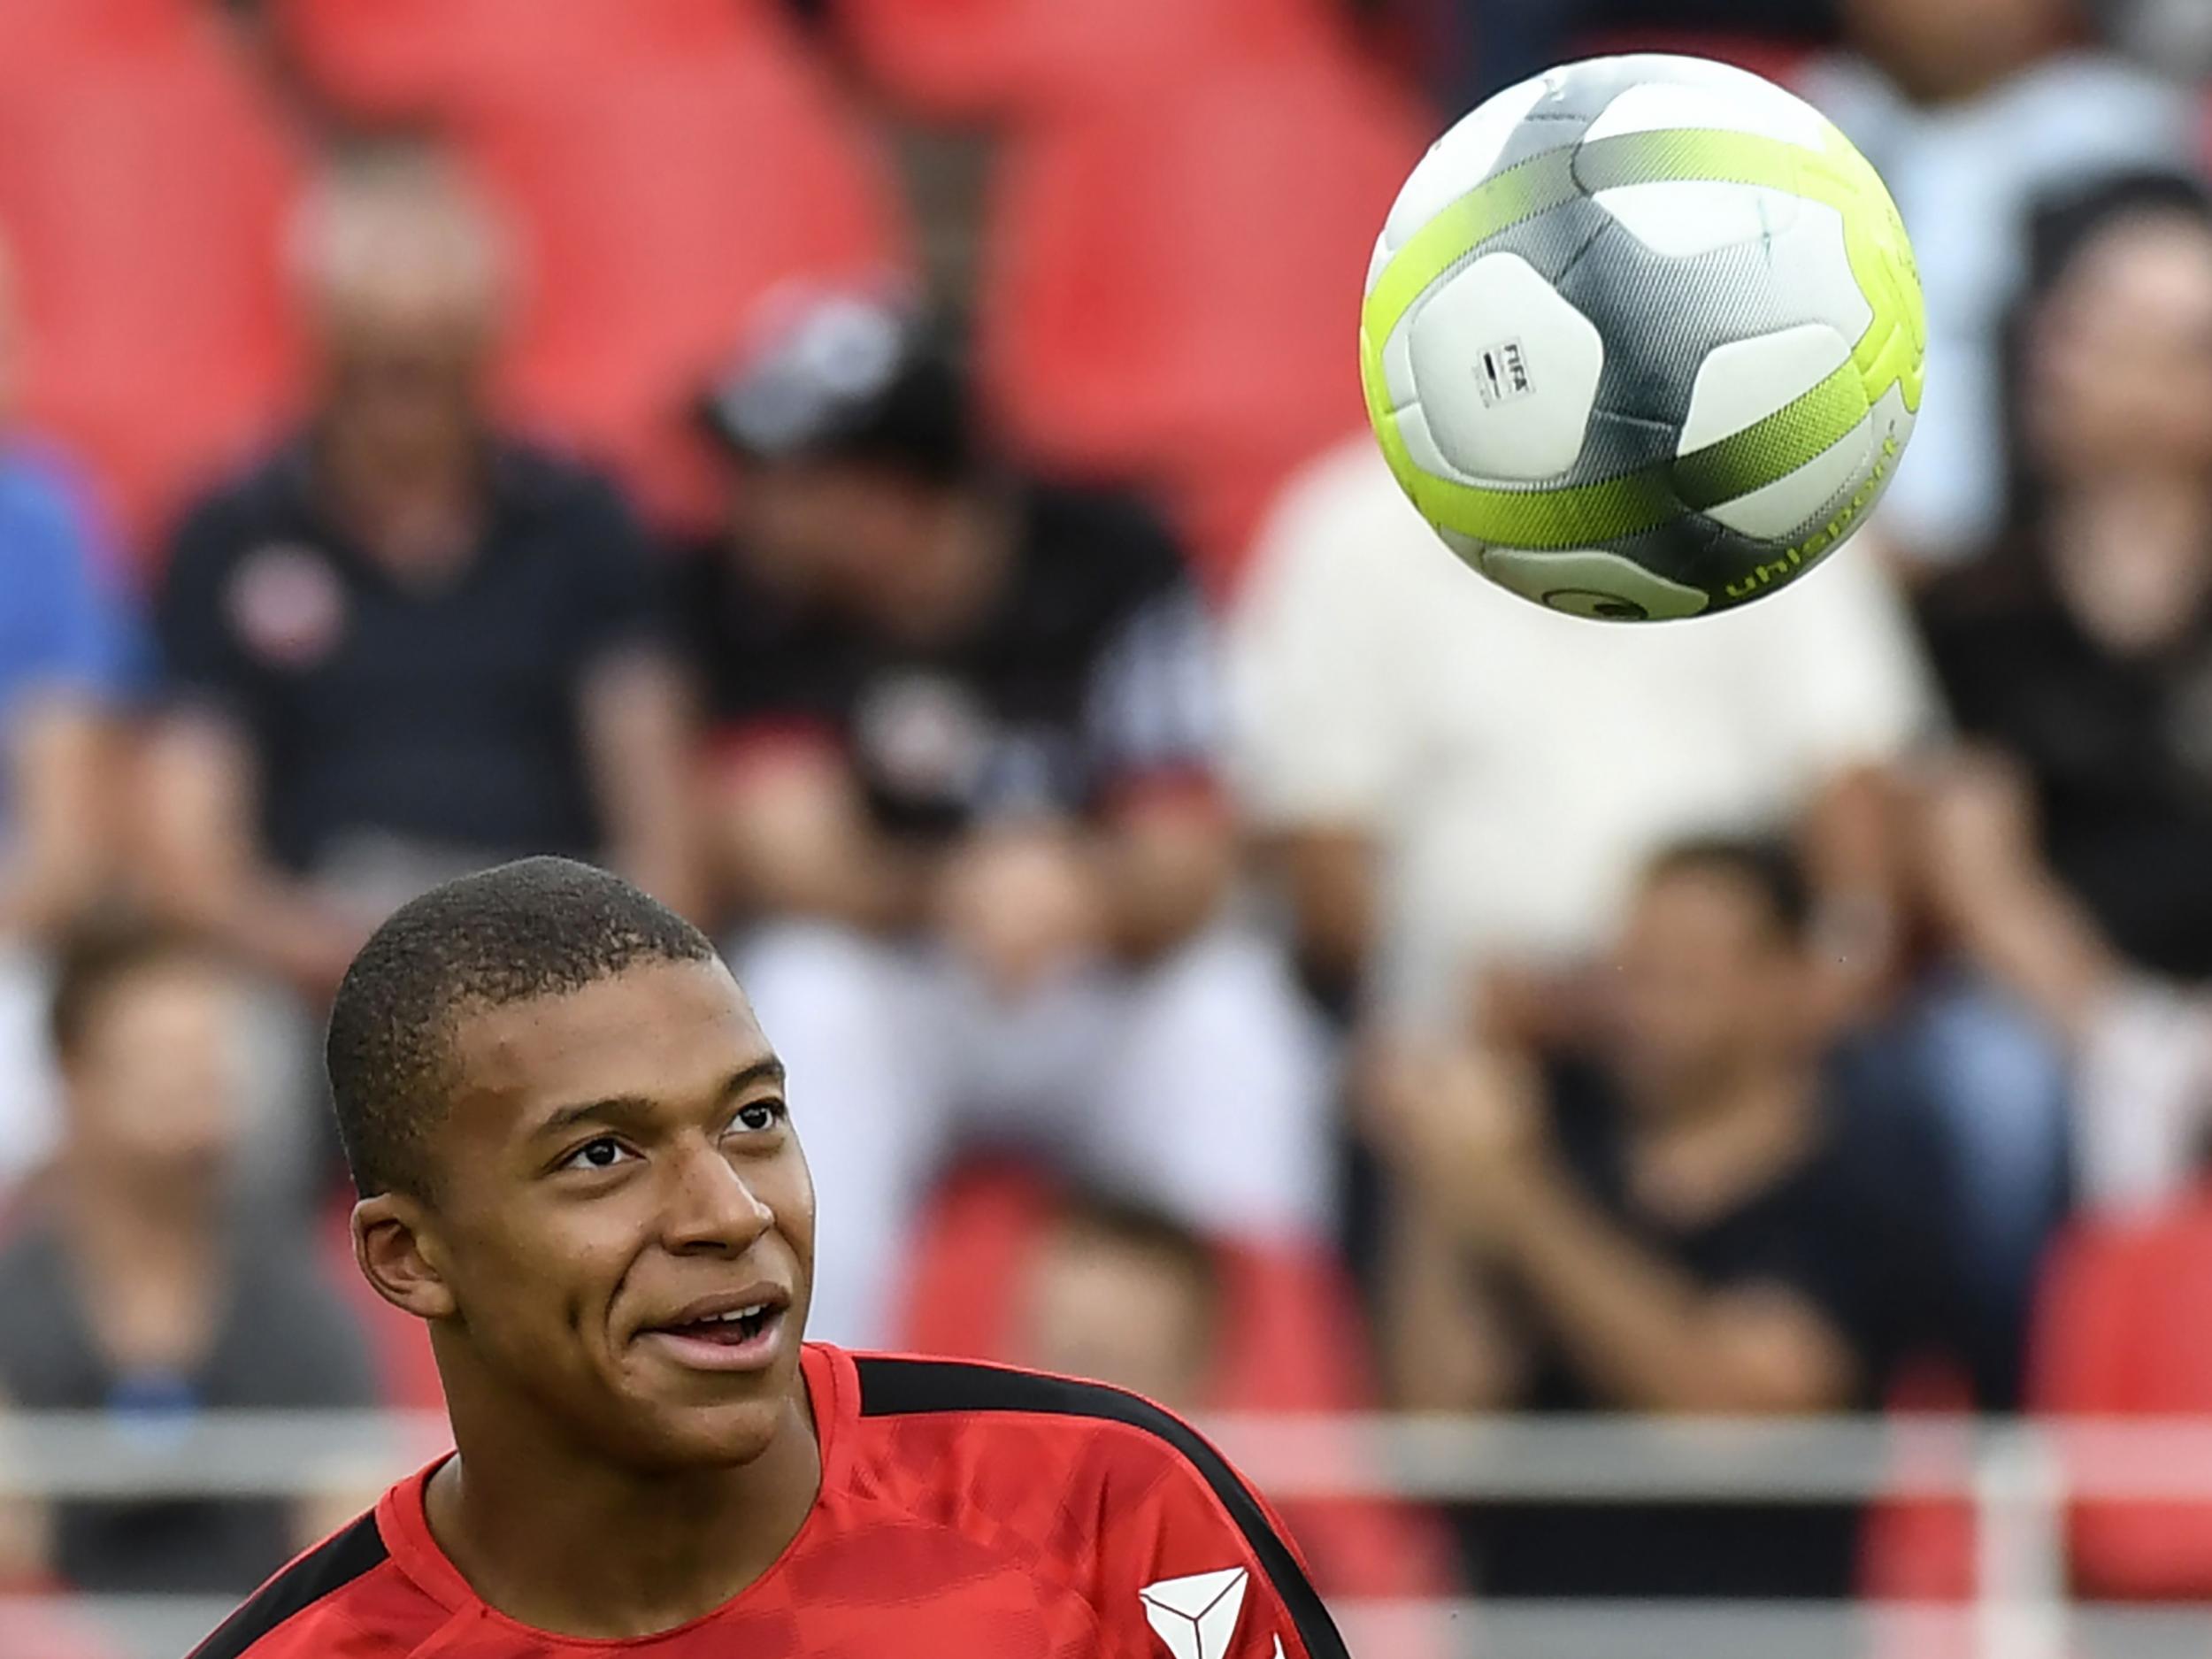 Kylian Mbappe has missed Monaco's last two games as rumours of a move gather speed